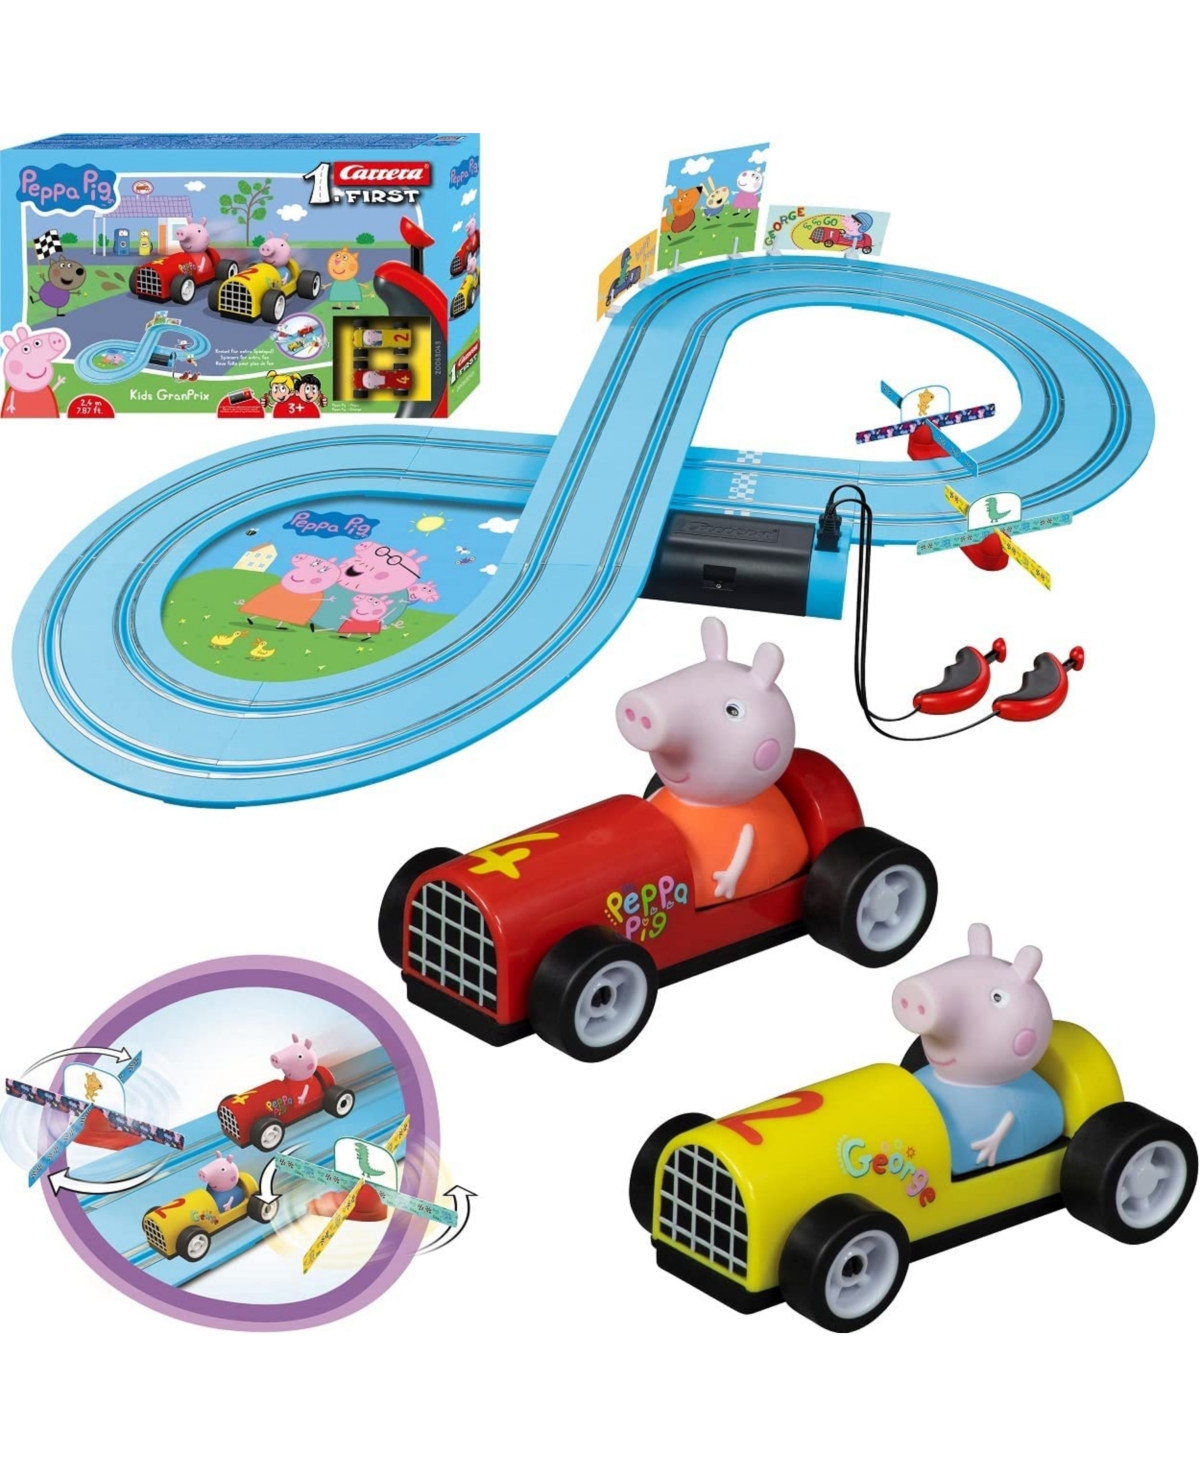 Carrera First Peppa Pig Kids Granprix Spinner Slot Car Race Track In No Color